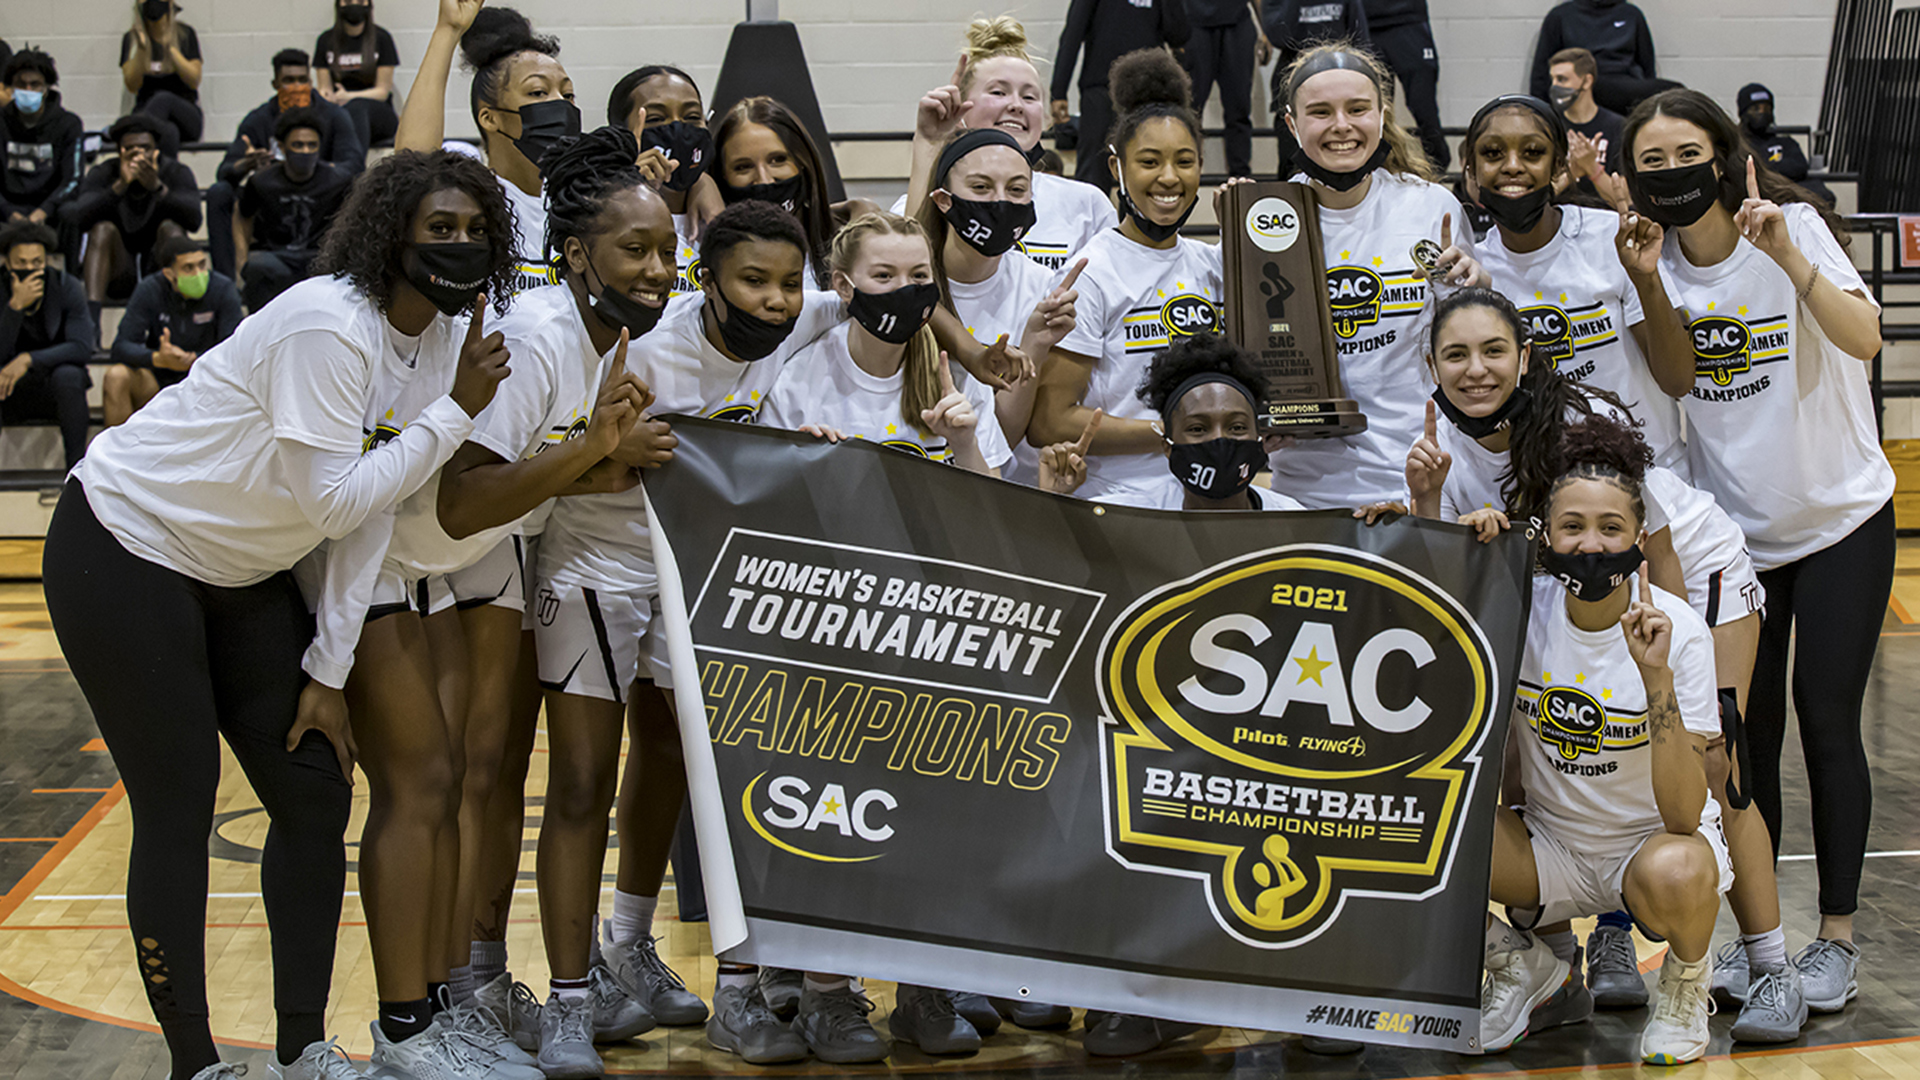 The Pioneers celebrate their second straight SAC Championship victory (photo by Chuck Williams)